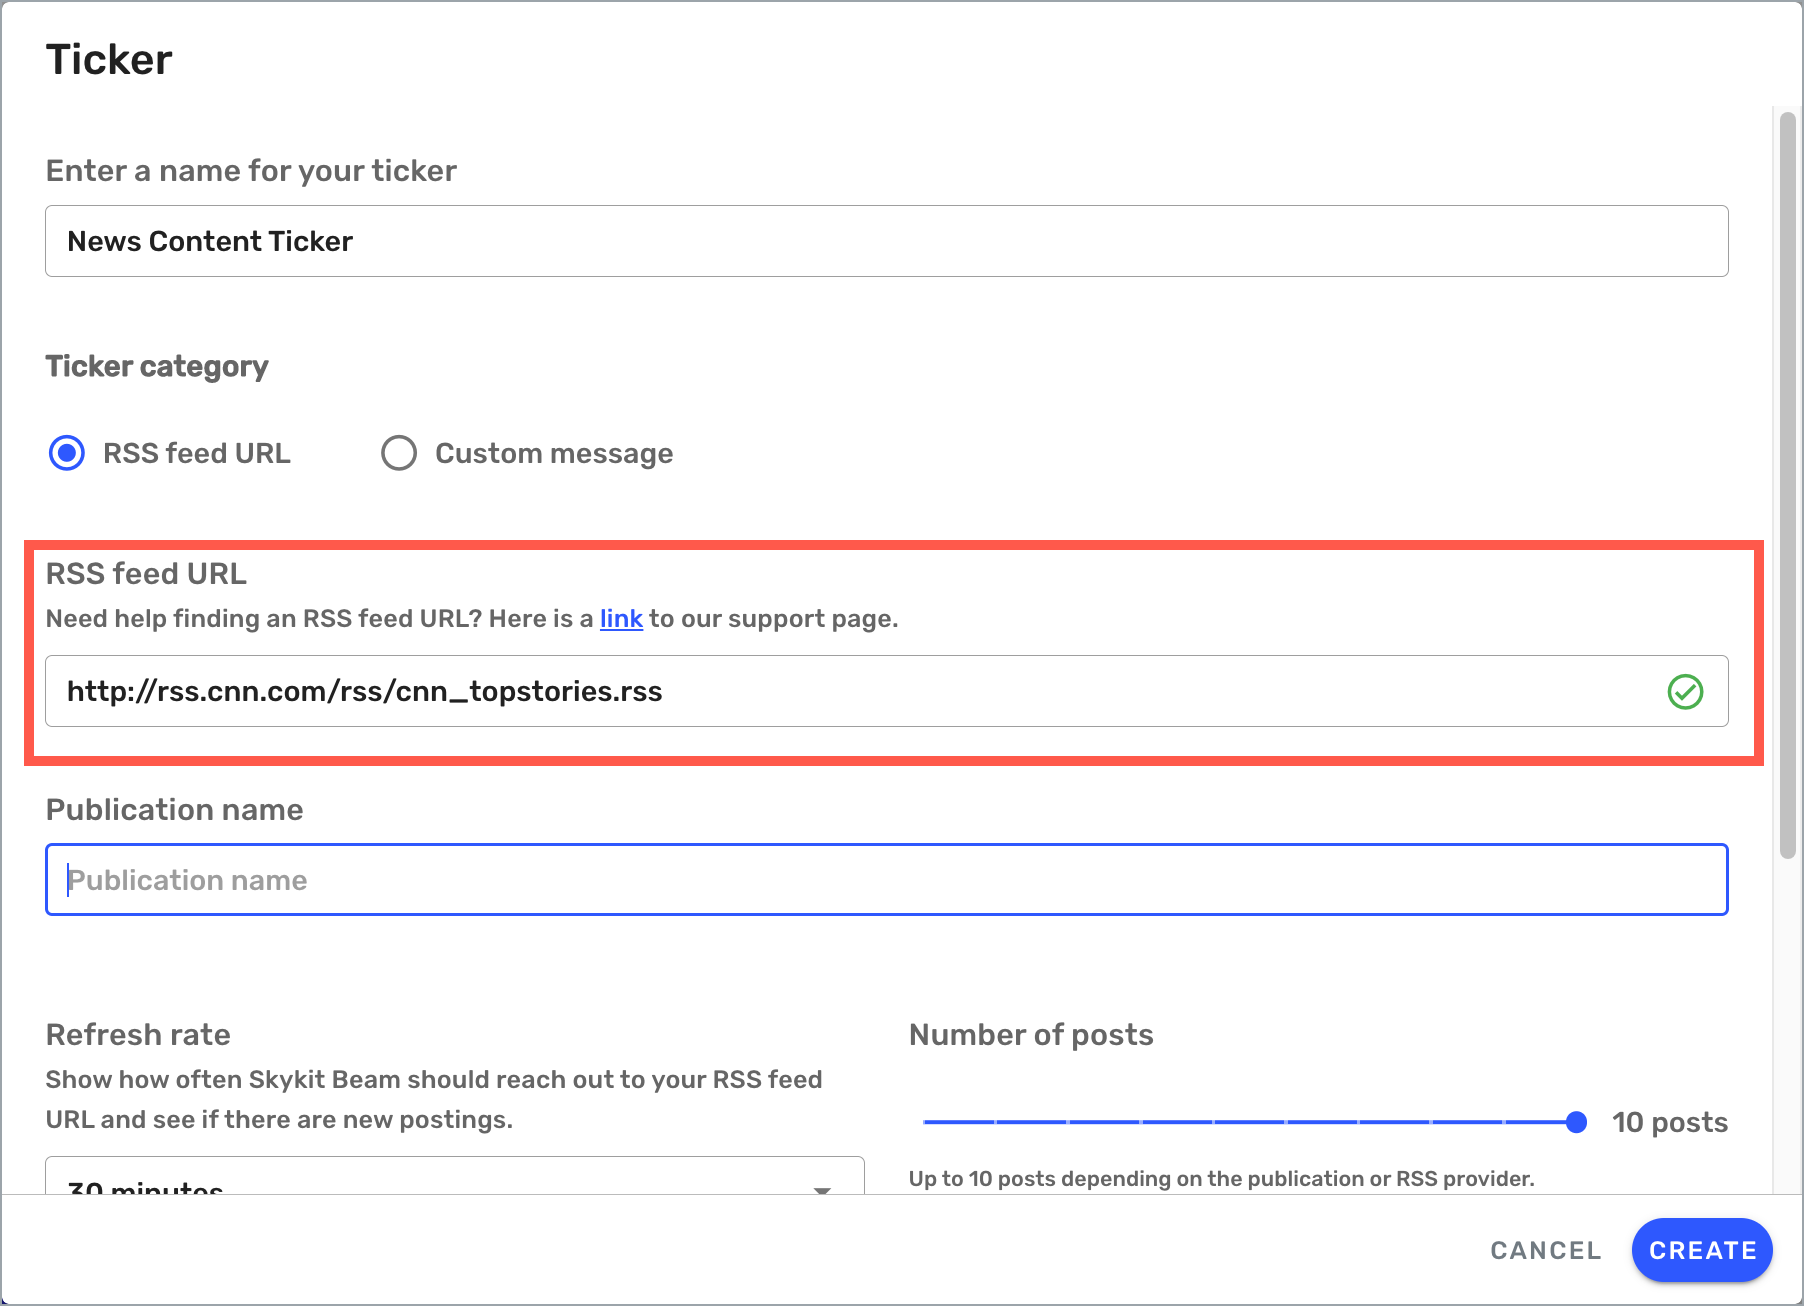 Ticker settings - RSS feed URL highlighted